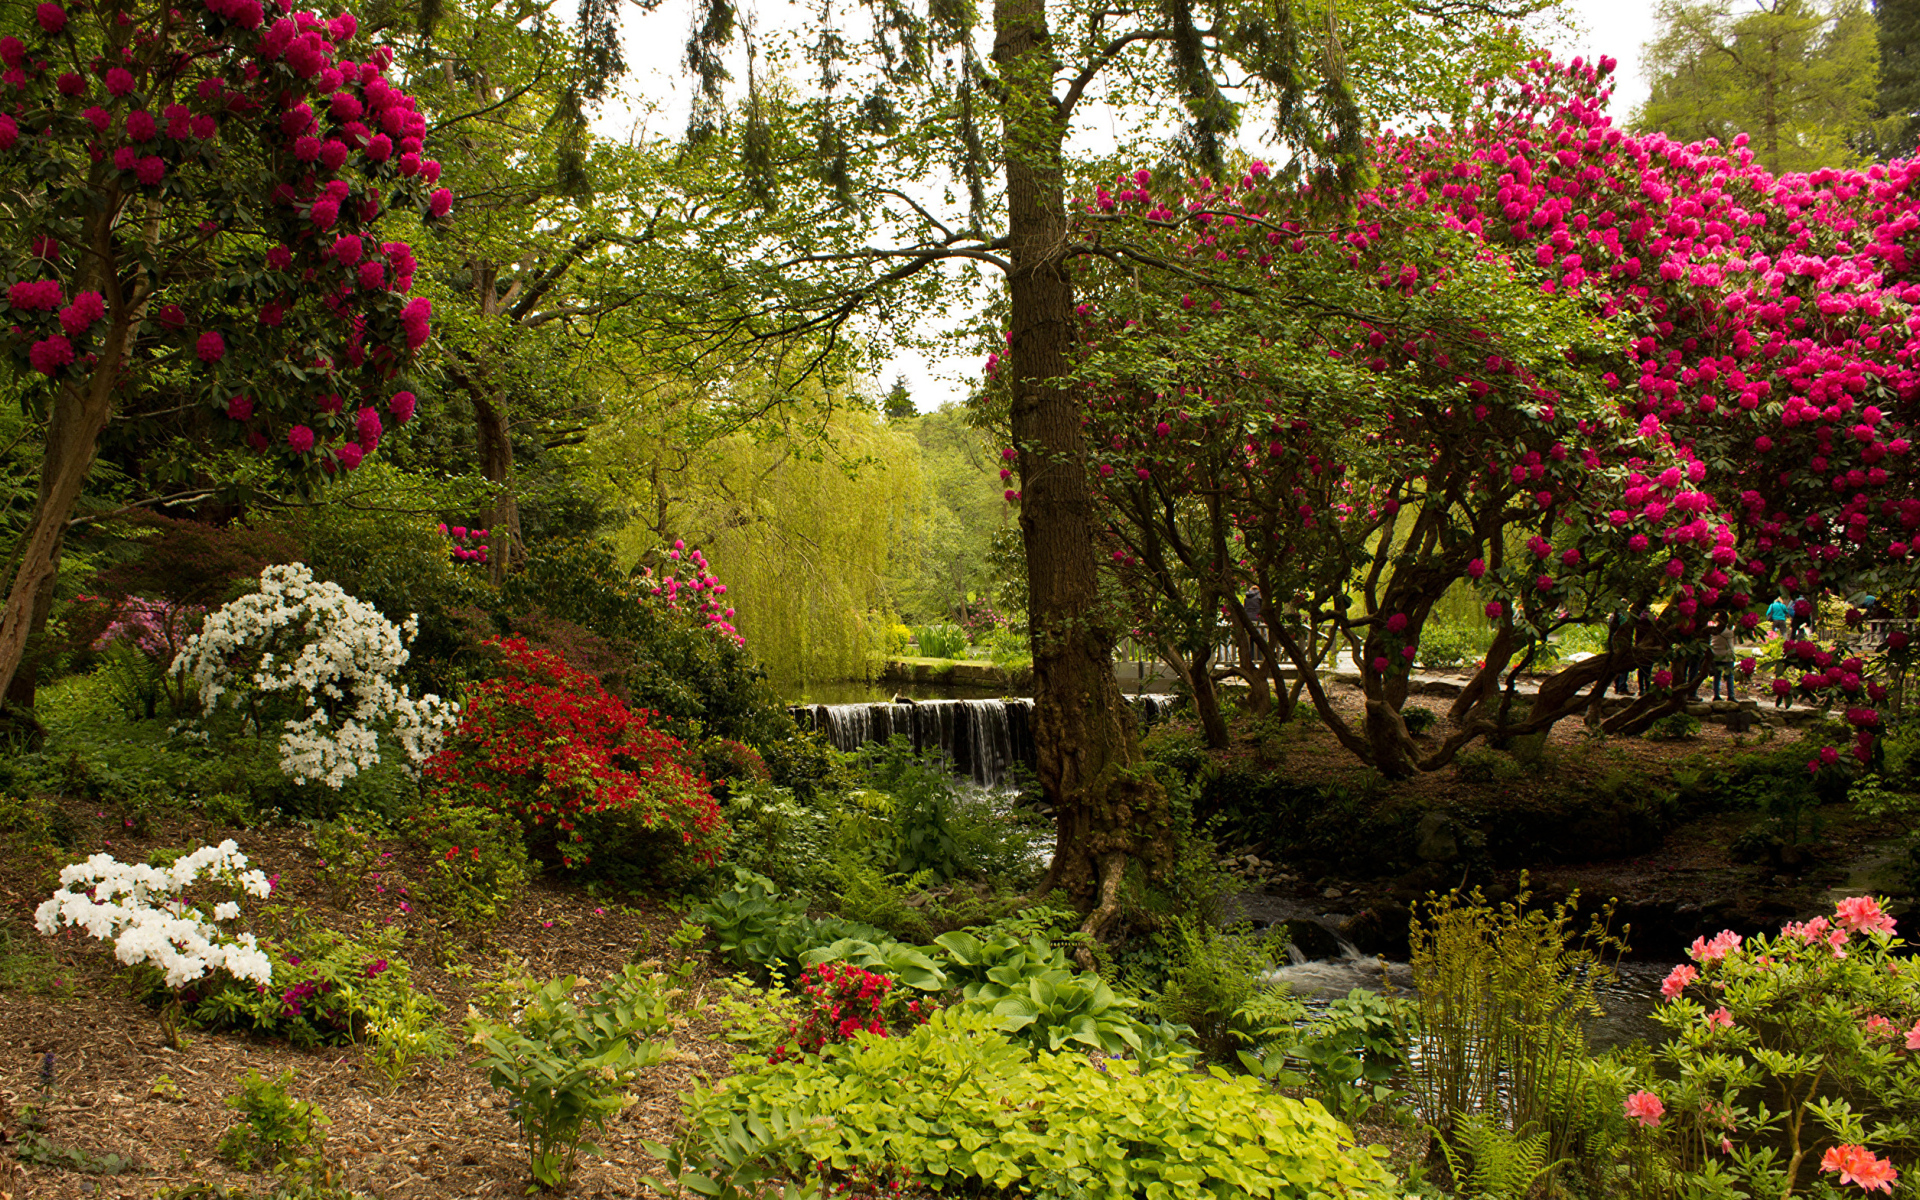 Beautiful picturesque park with flowering bushes